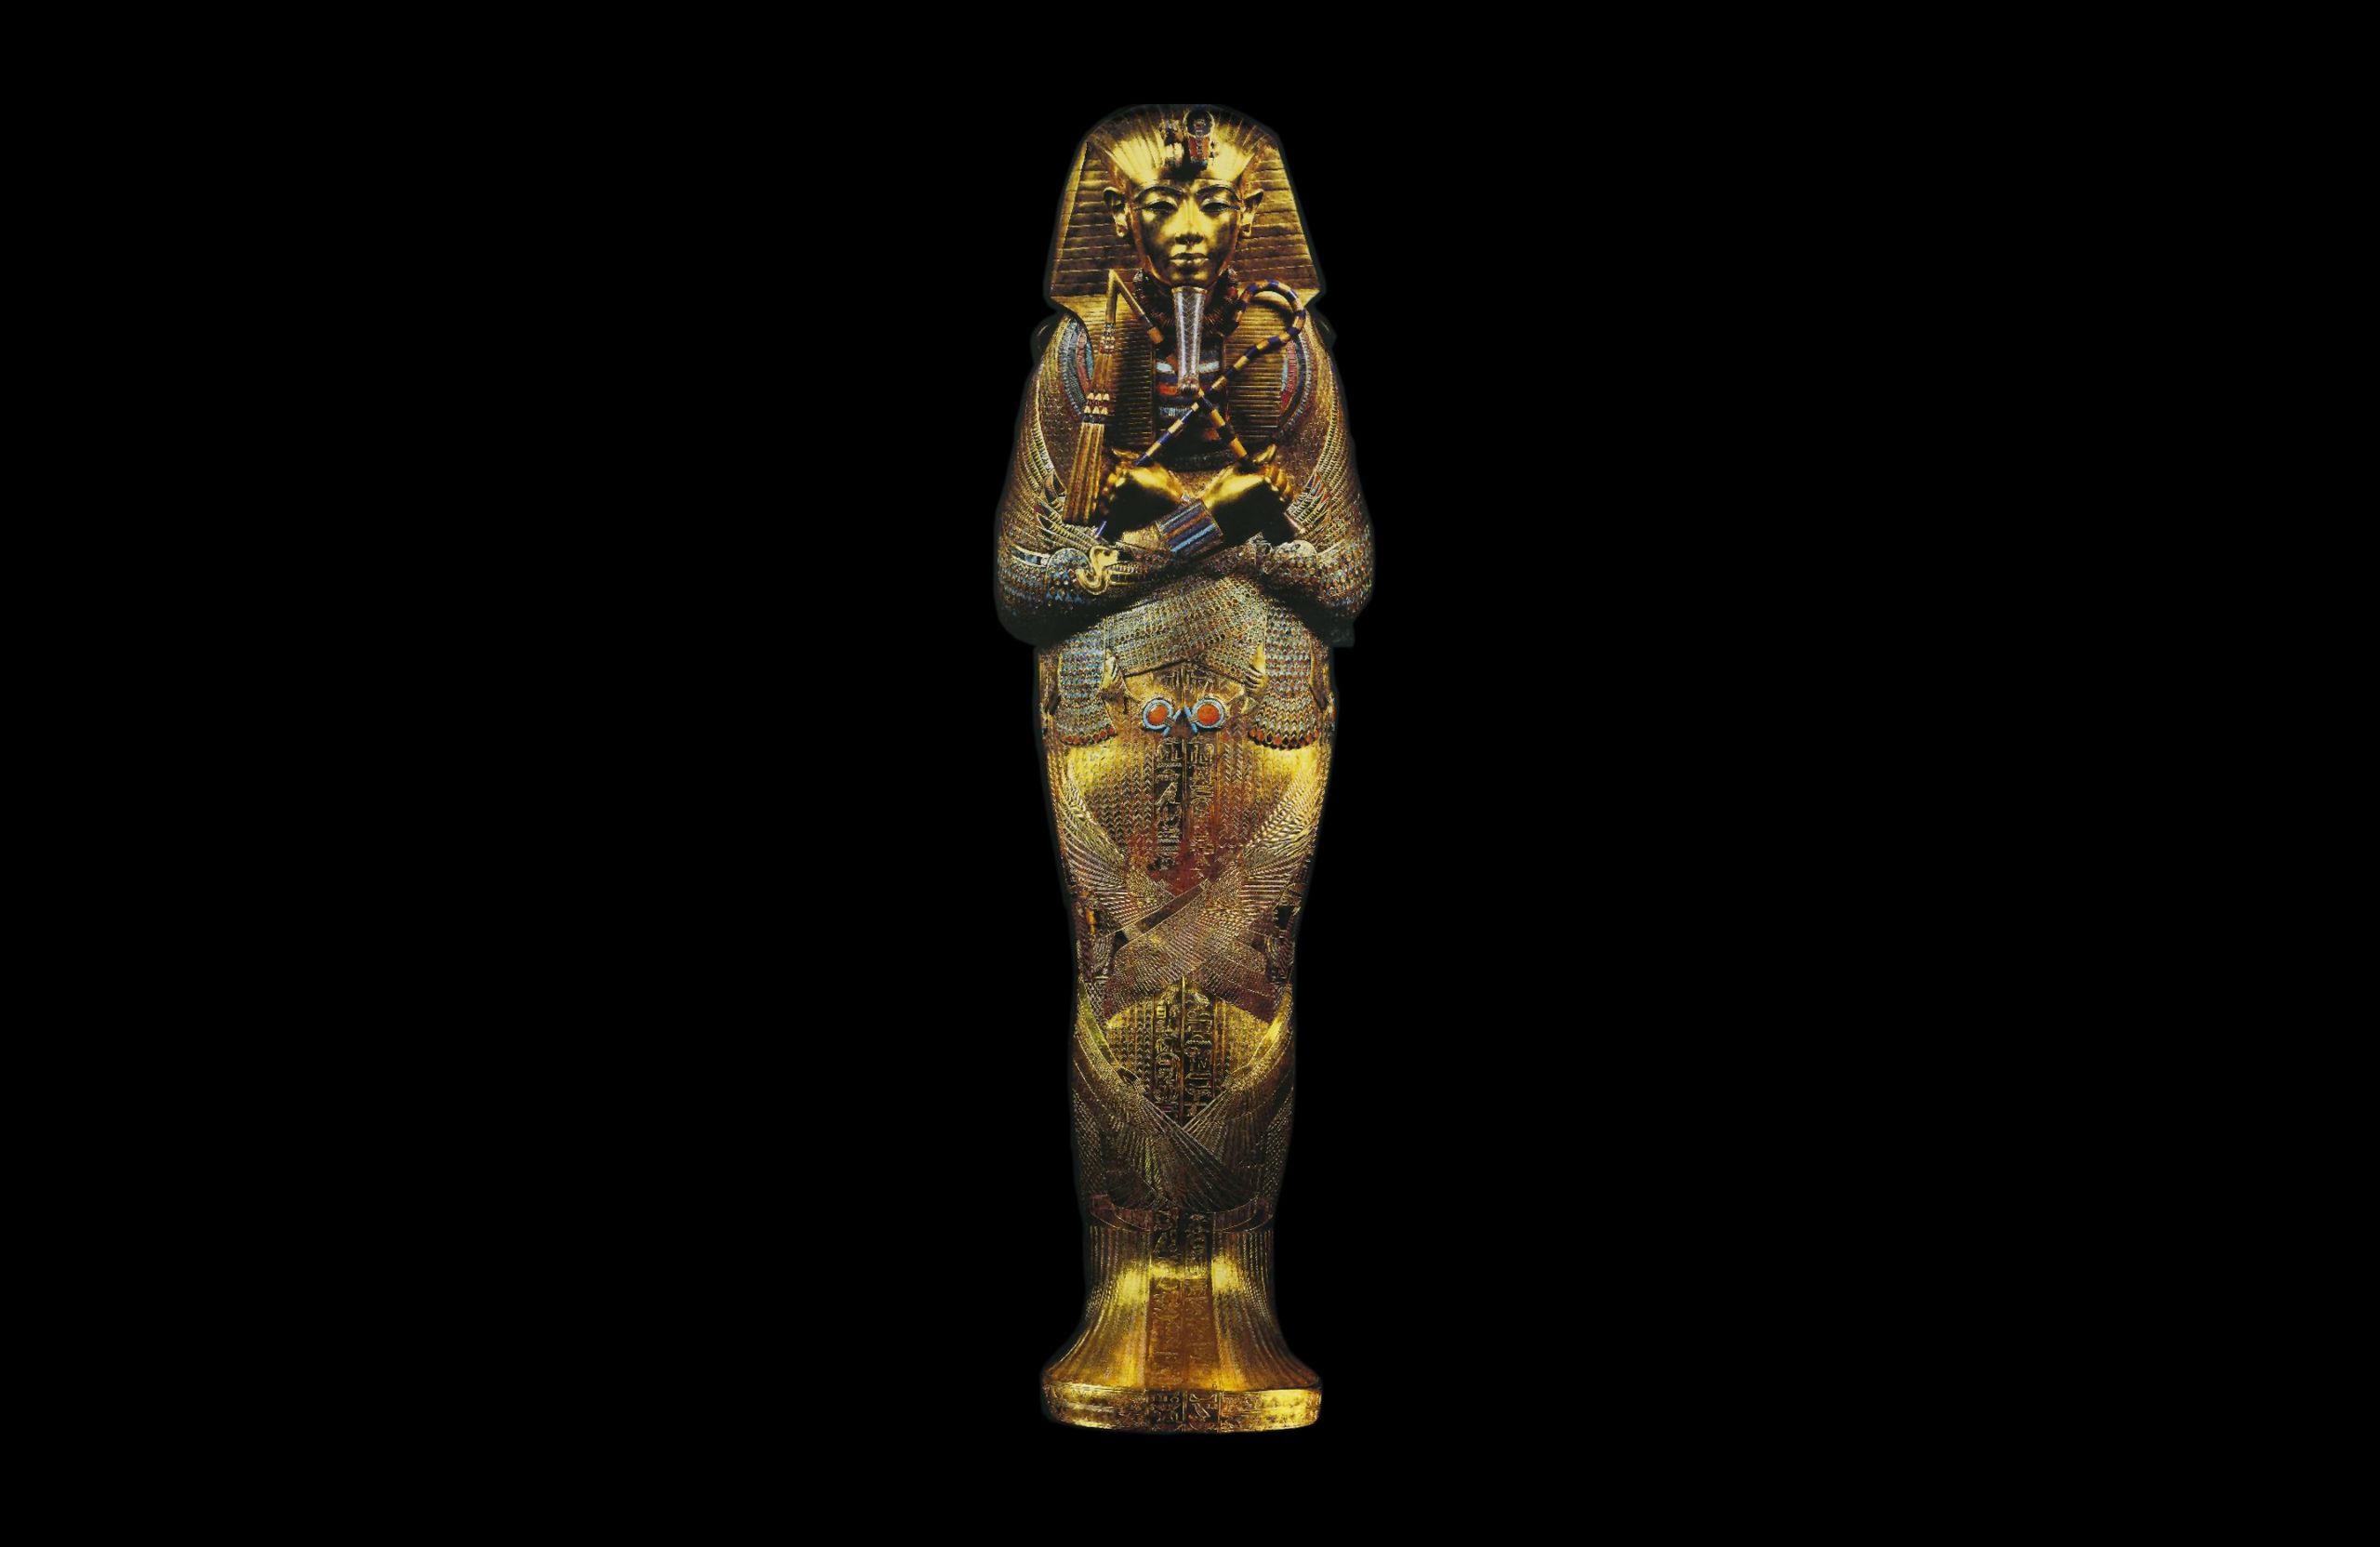 Tutankhamun’s tomb, innermost coffin, c. 1323 B.C.E., 18th Dynasty, New Kingdom, gold with inlay of enamel and semiprecious stones, found in the Valley of the Kings in 1922 (Egyptian Museum of Antiquities, Cairo)